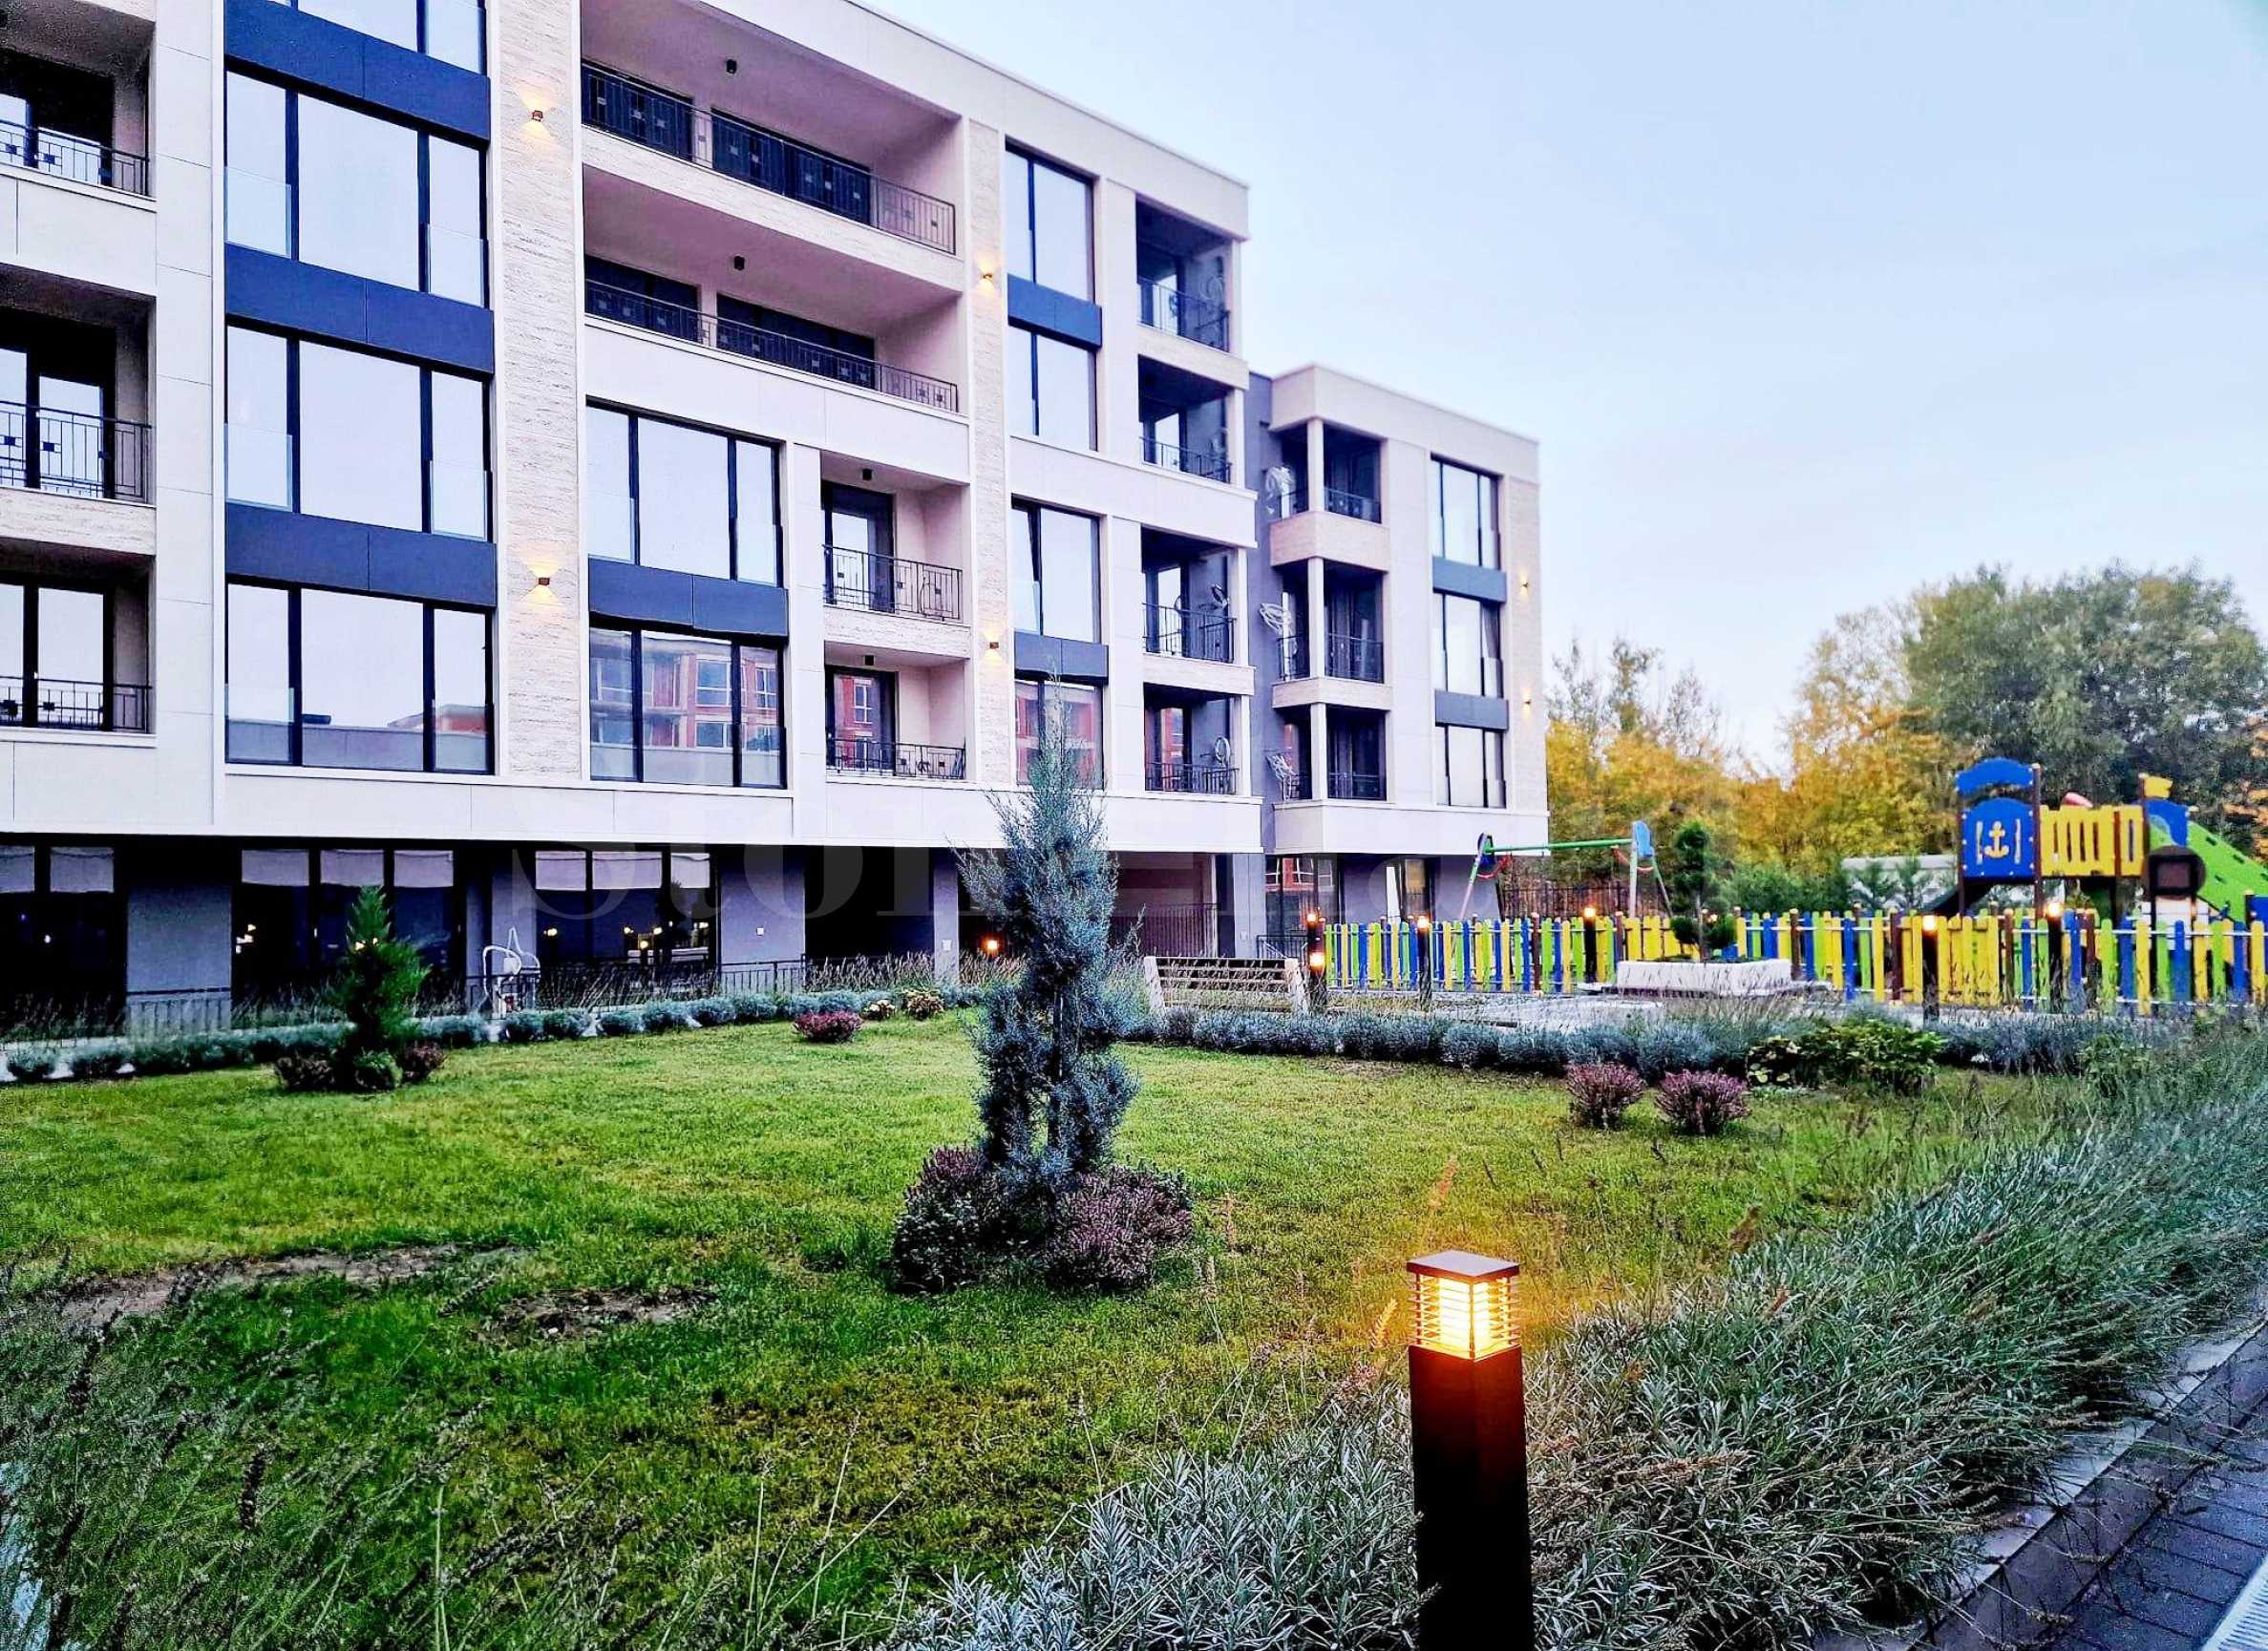 Residential complex with Act 16, in 